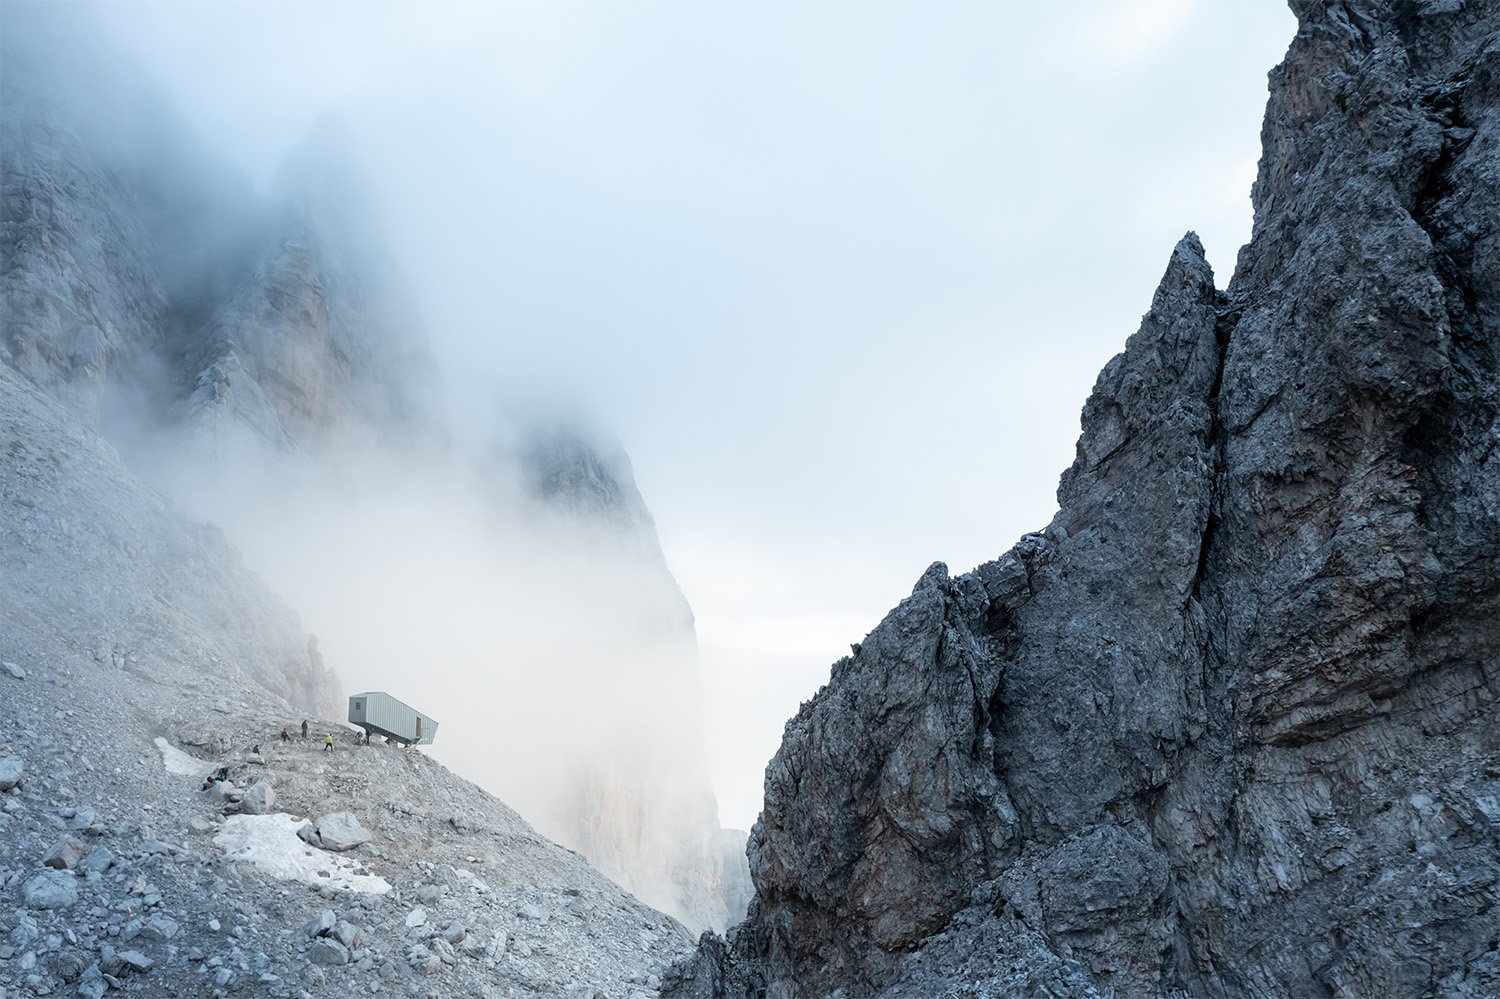 The relationship with the rock of the Dolomites. | Iwan Baan